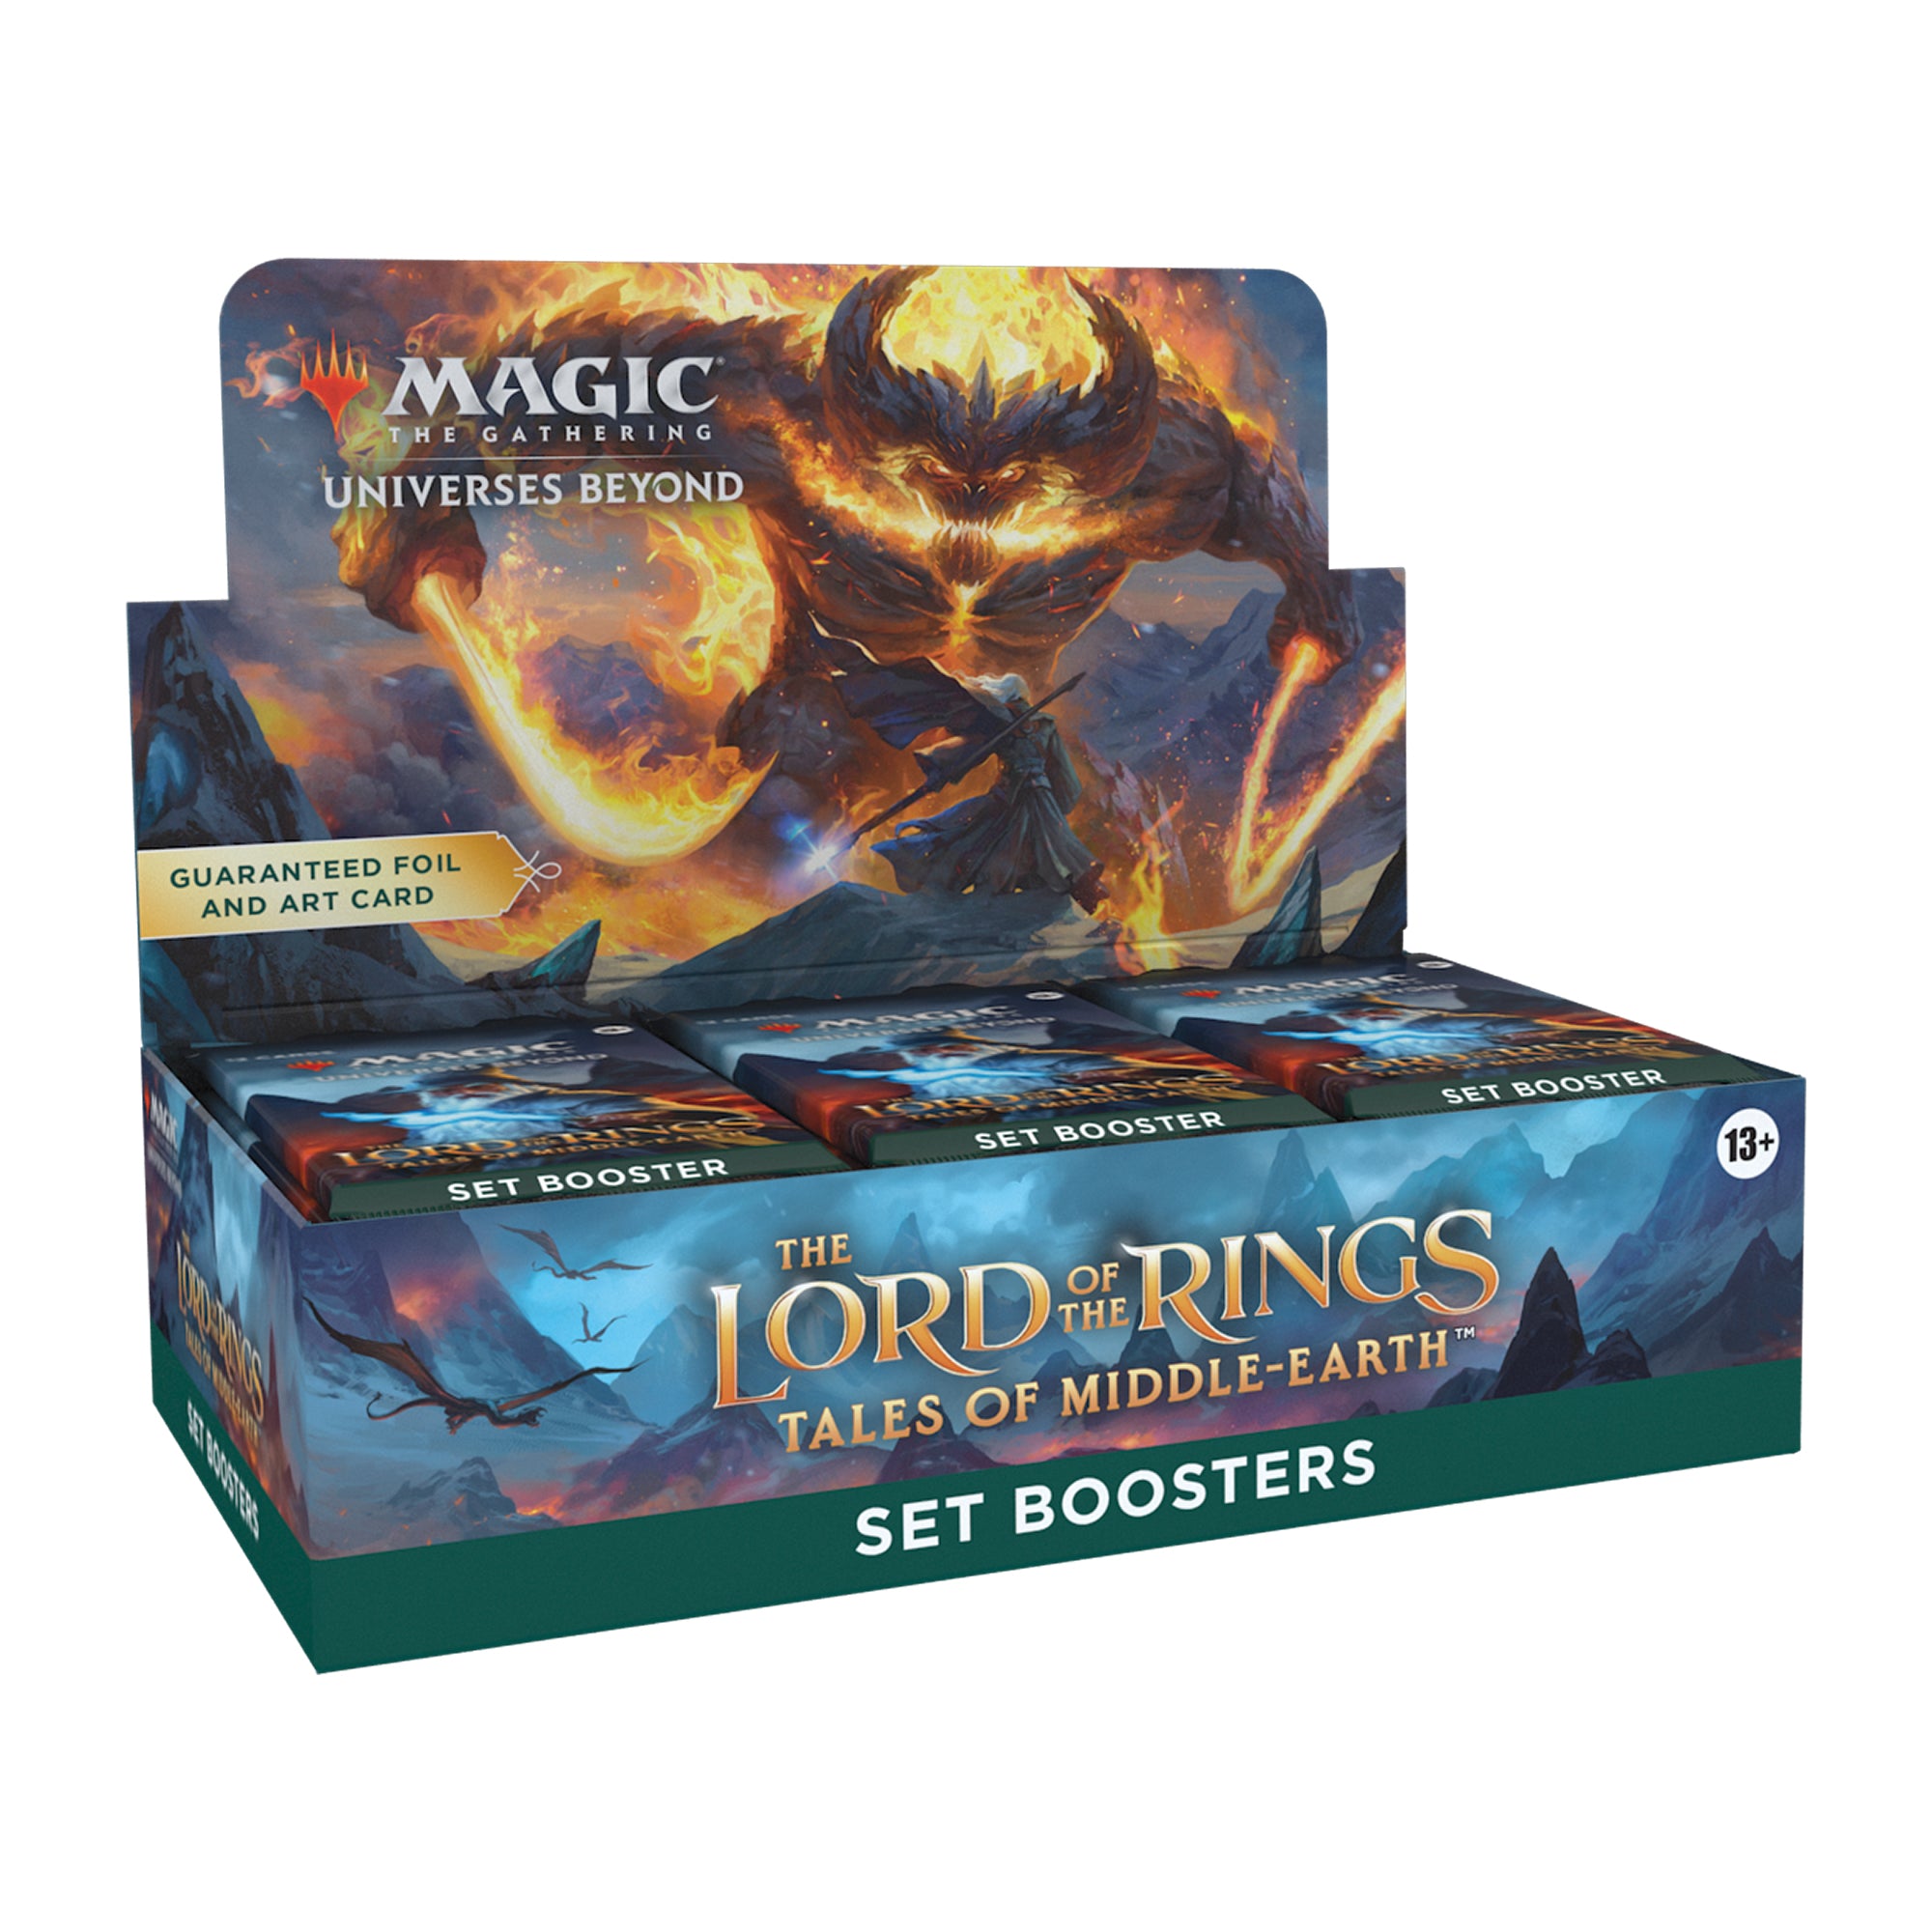 The Lord of the Rings: Tales of Middle-Earth Set Booster Display (30 Booster) - englisch